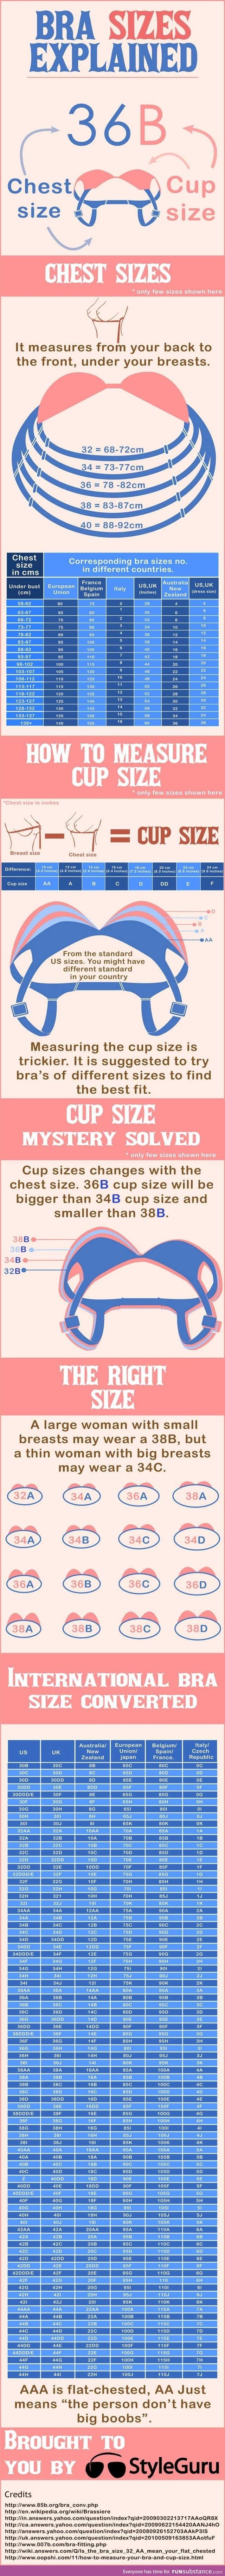 Bra cup sizes explained